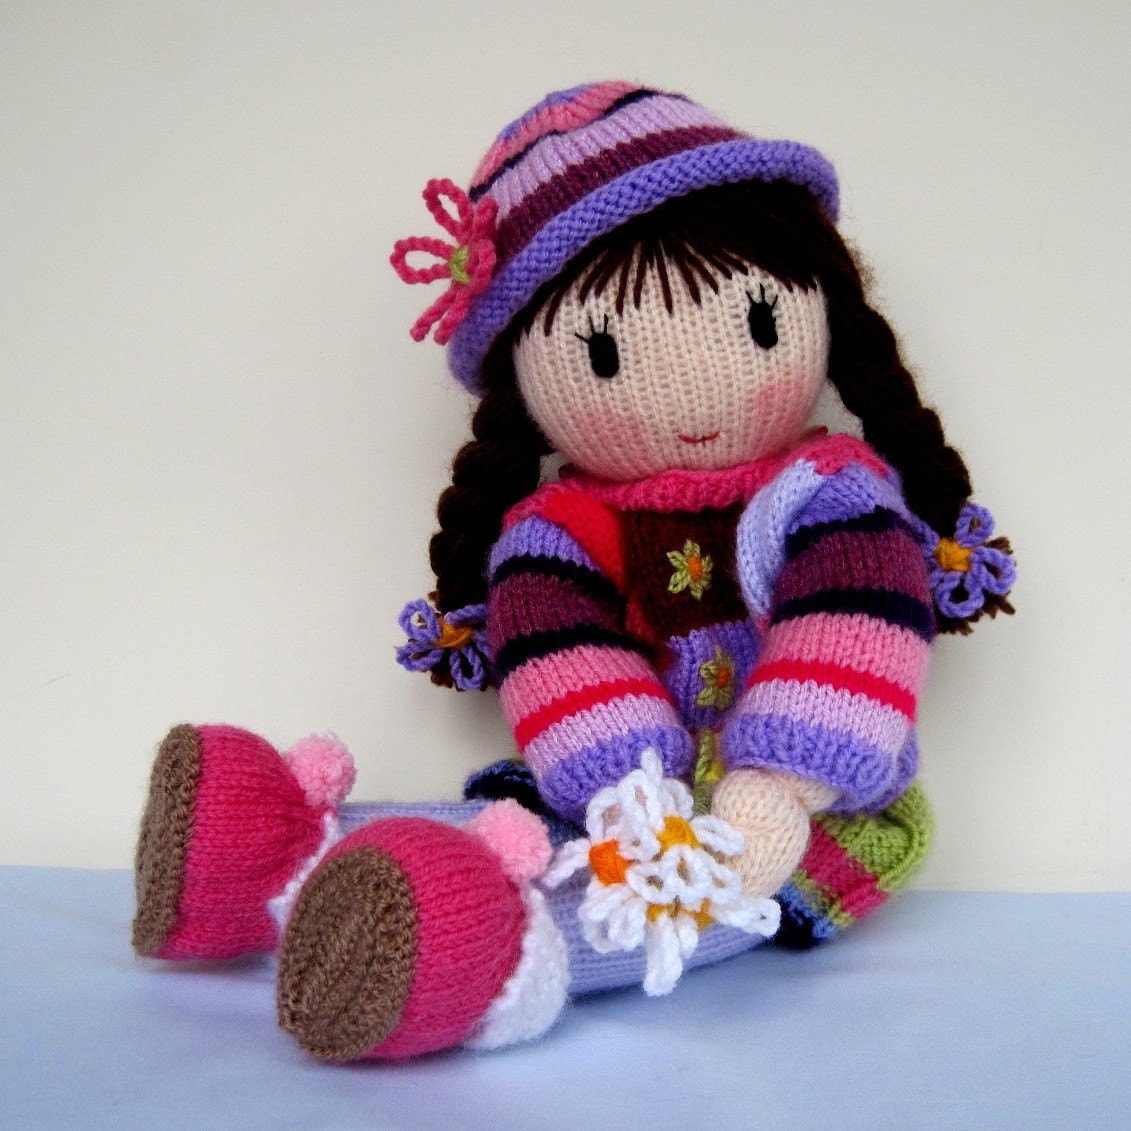 POSY knitted toy doll PDF email knitting pattern